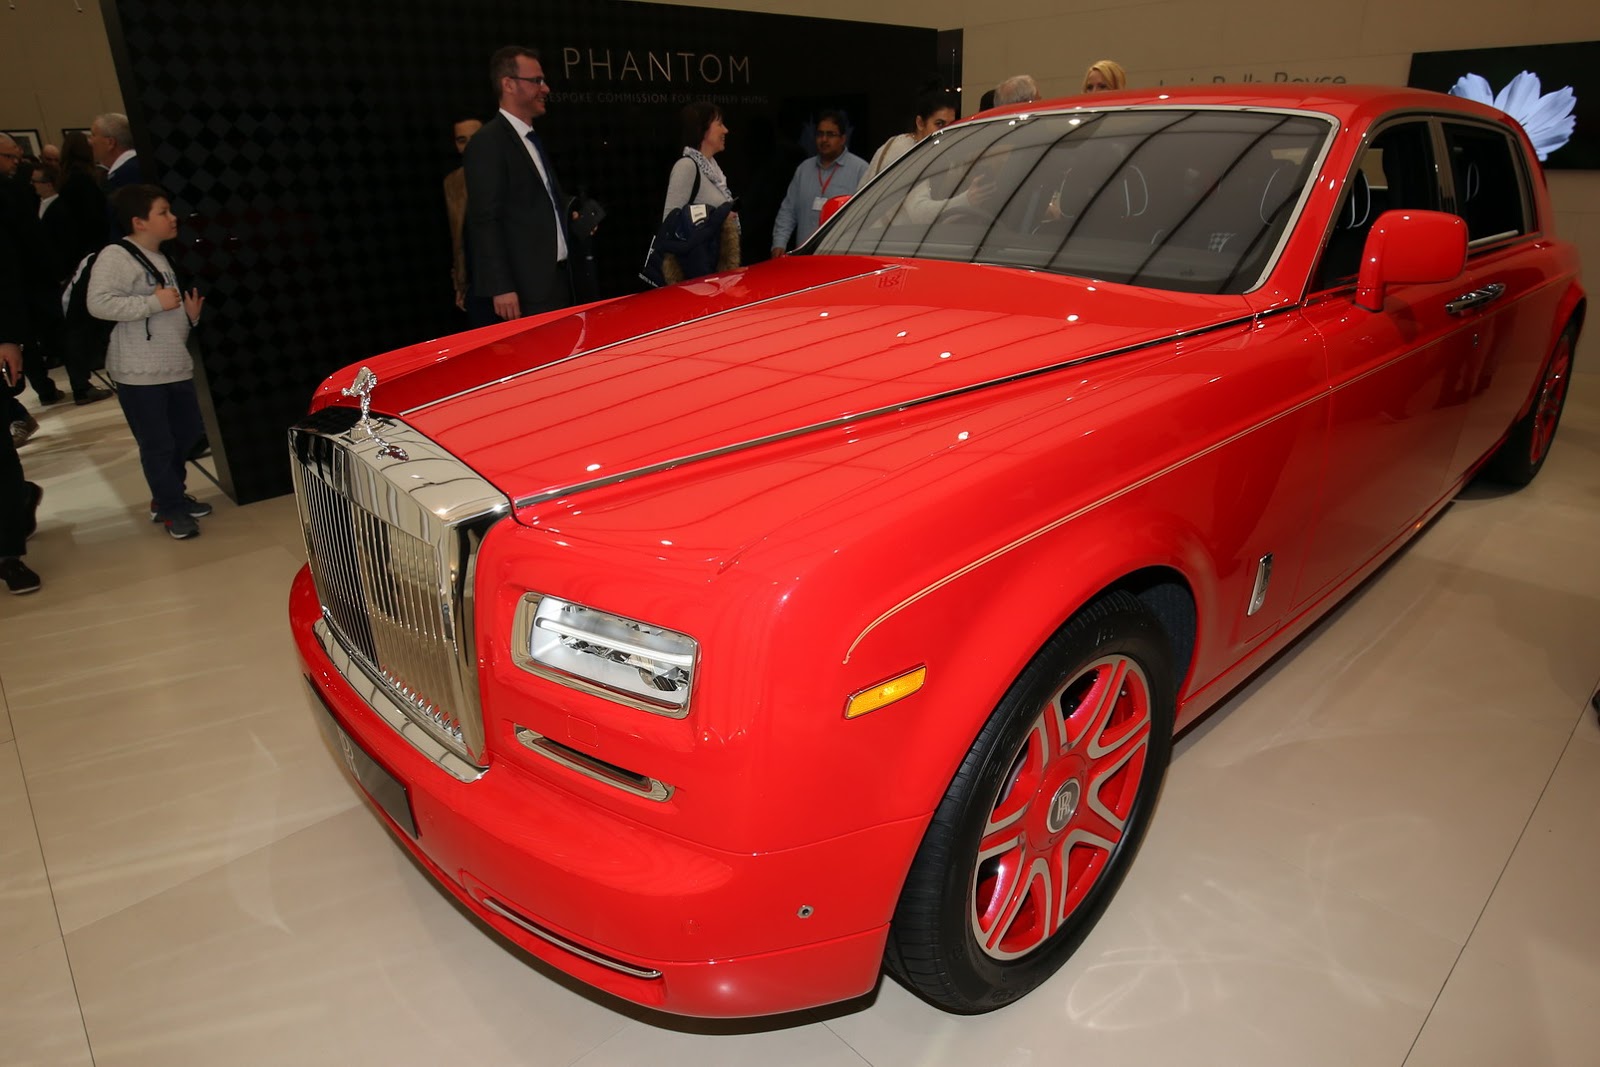 The Bonneville Salt Flats inspired these specialedition RollsRoyces  CNET